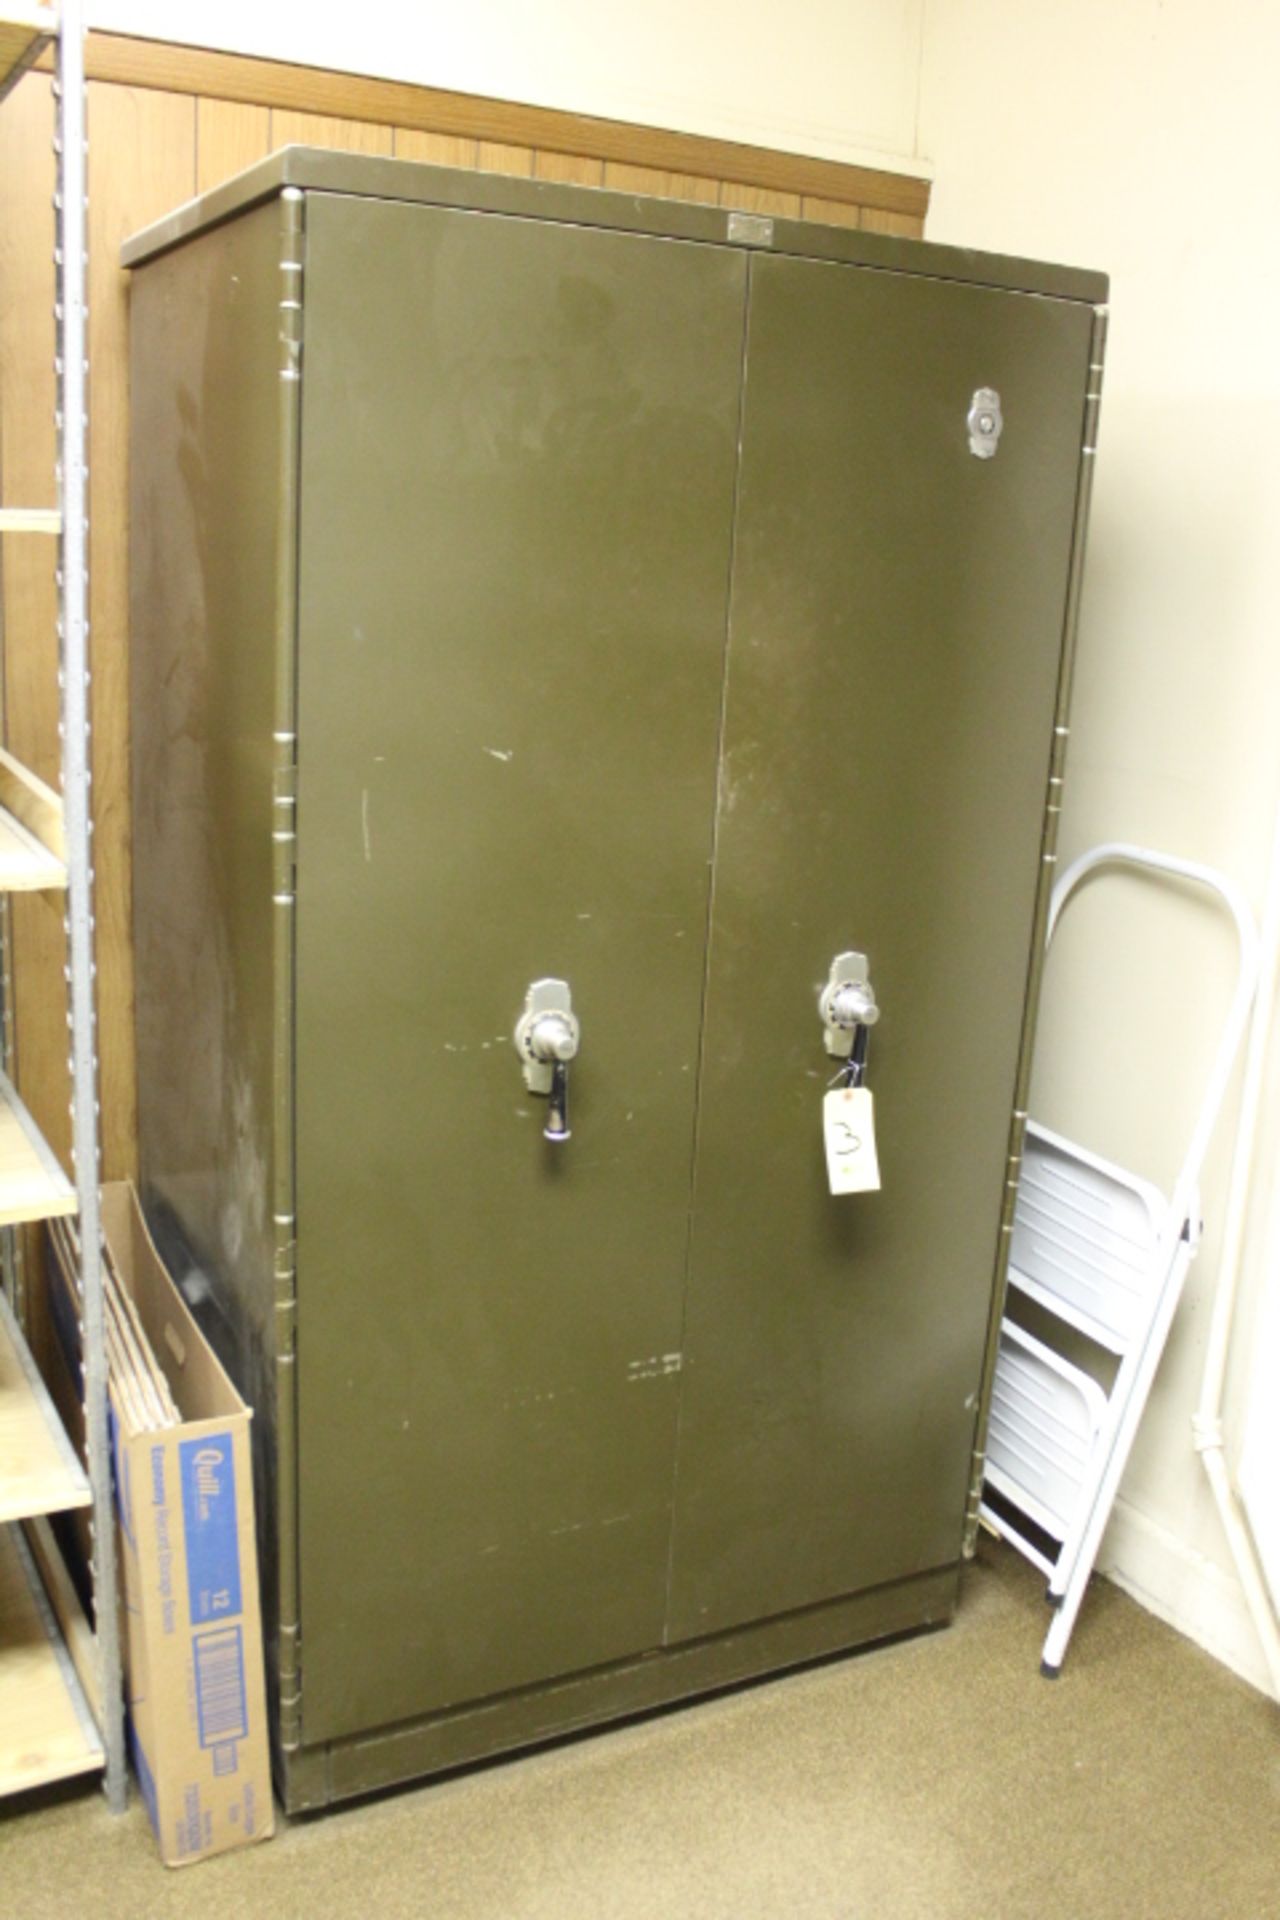 YALE REMINGTON SAFE DOUBLE DOOR SAFE WITH COMBINATION